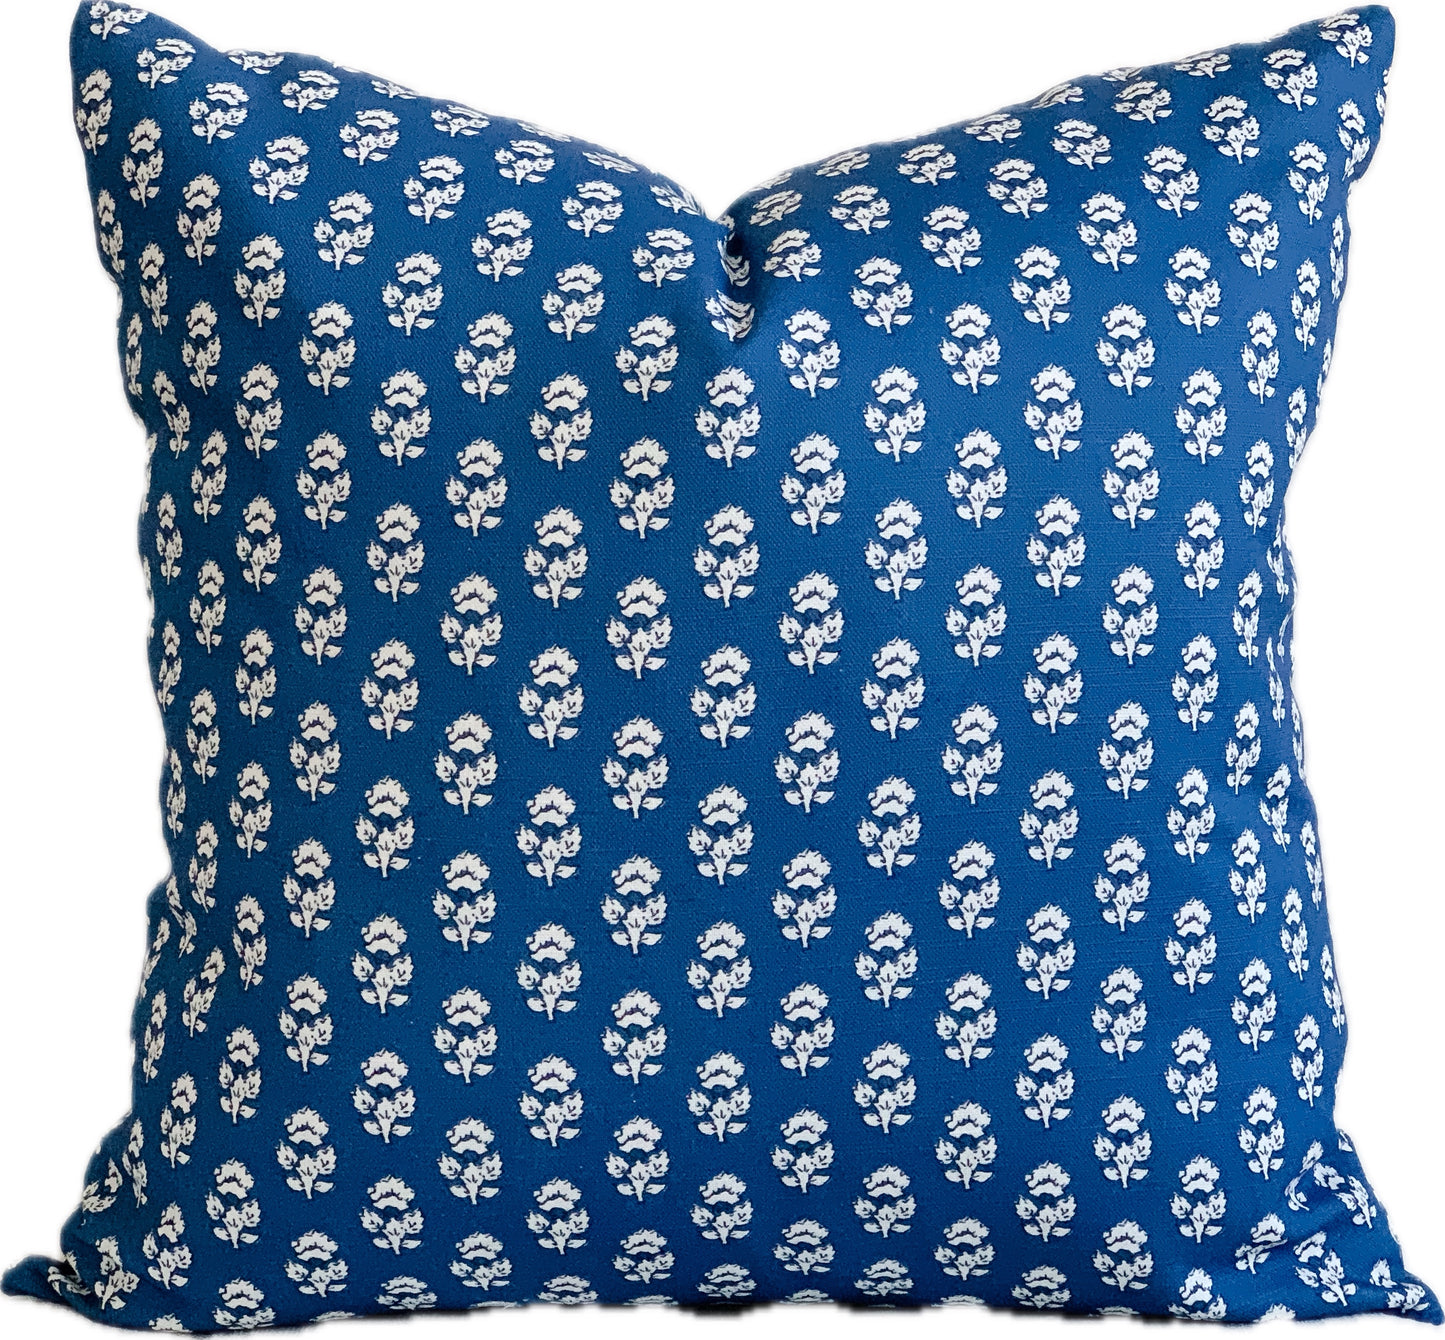 Navy blue designer square pillow with  a small white flower repeat